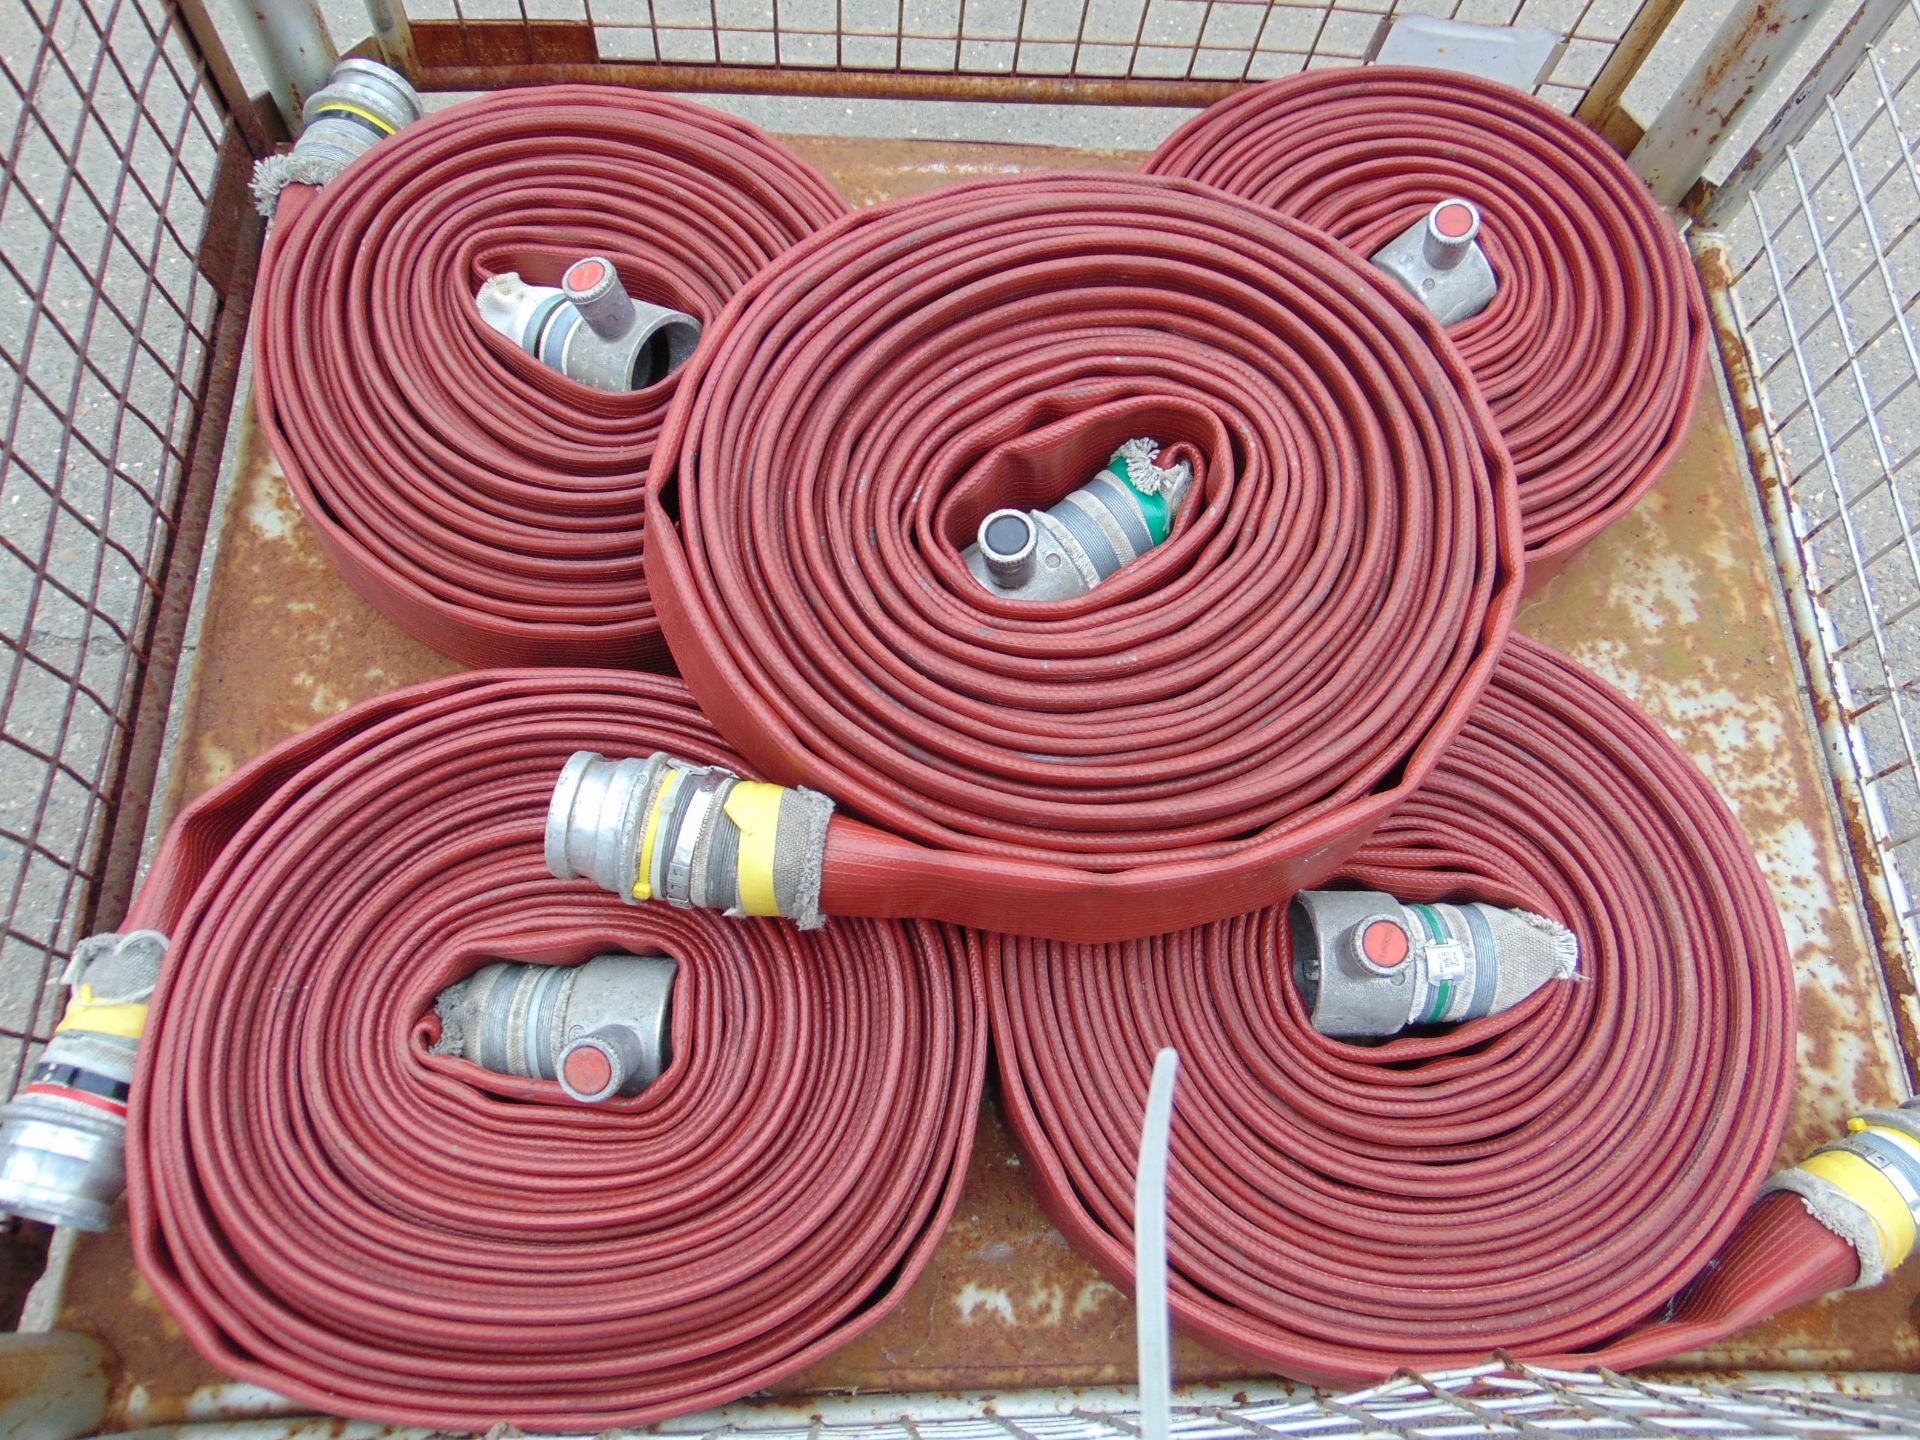 5 x Angus 64mm x 23m Layflat Fire Hoses with Couplings Sold as shown without warranty.